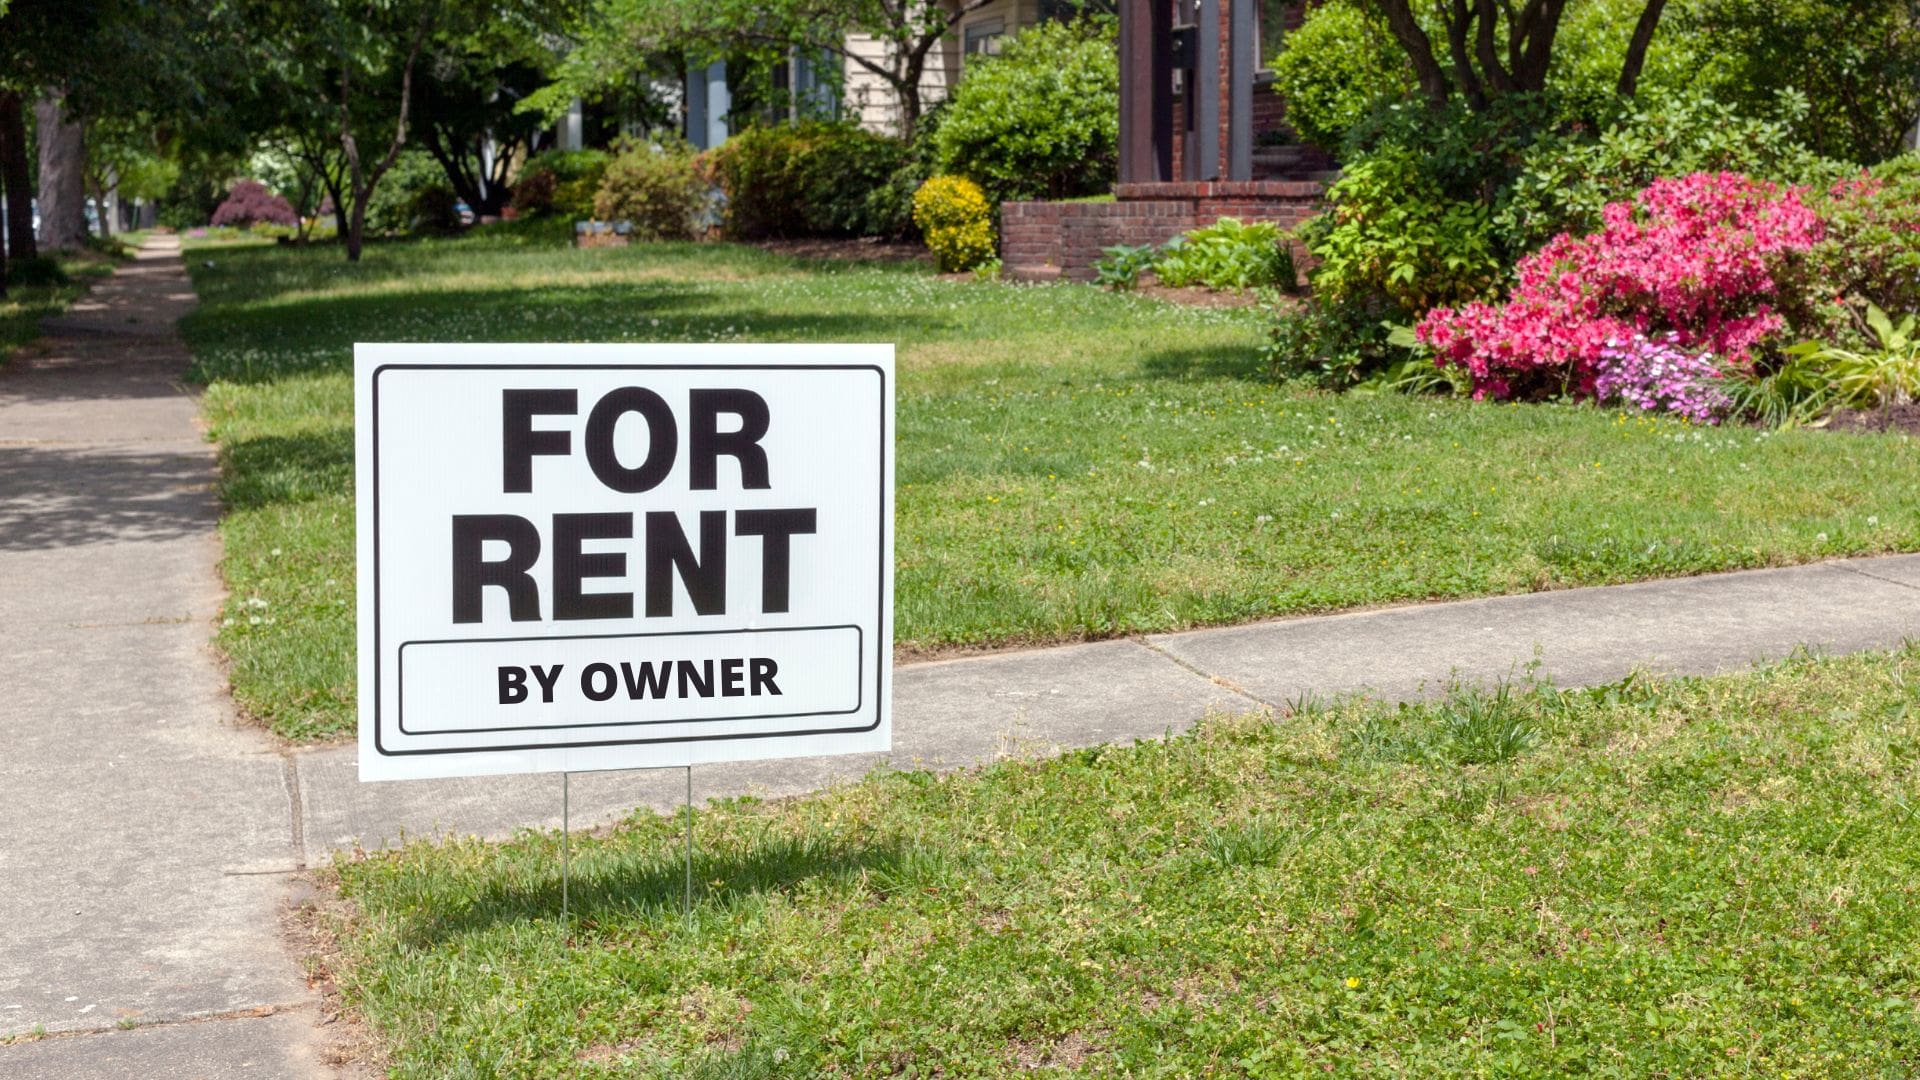 Look for "For Rent" signs in yards to find owners who may be willing to sell a property off-market